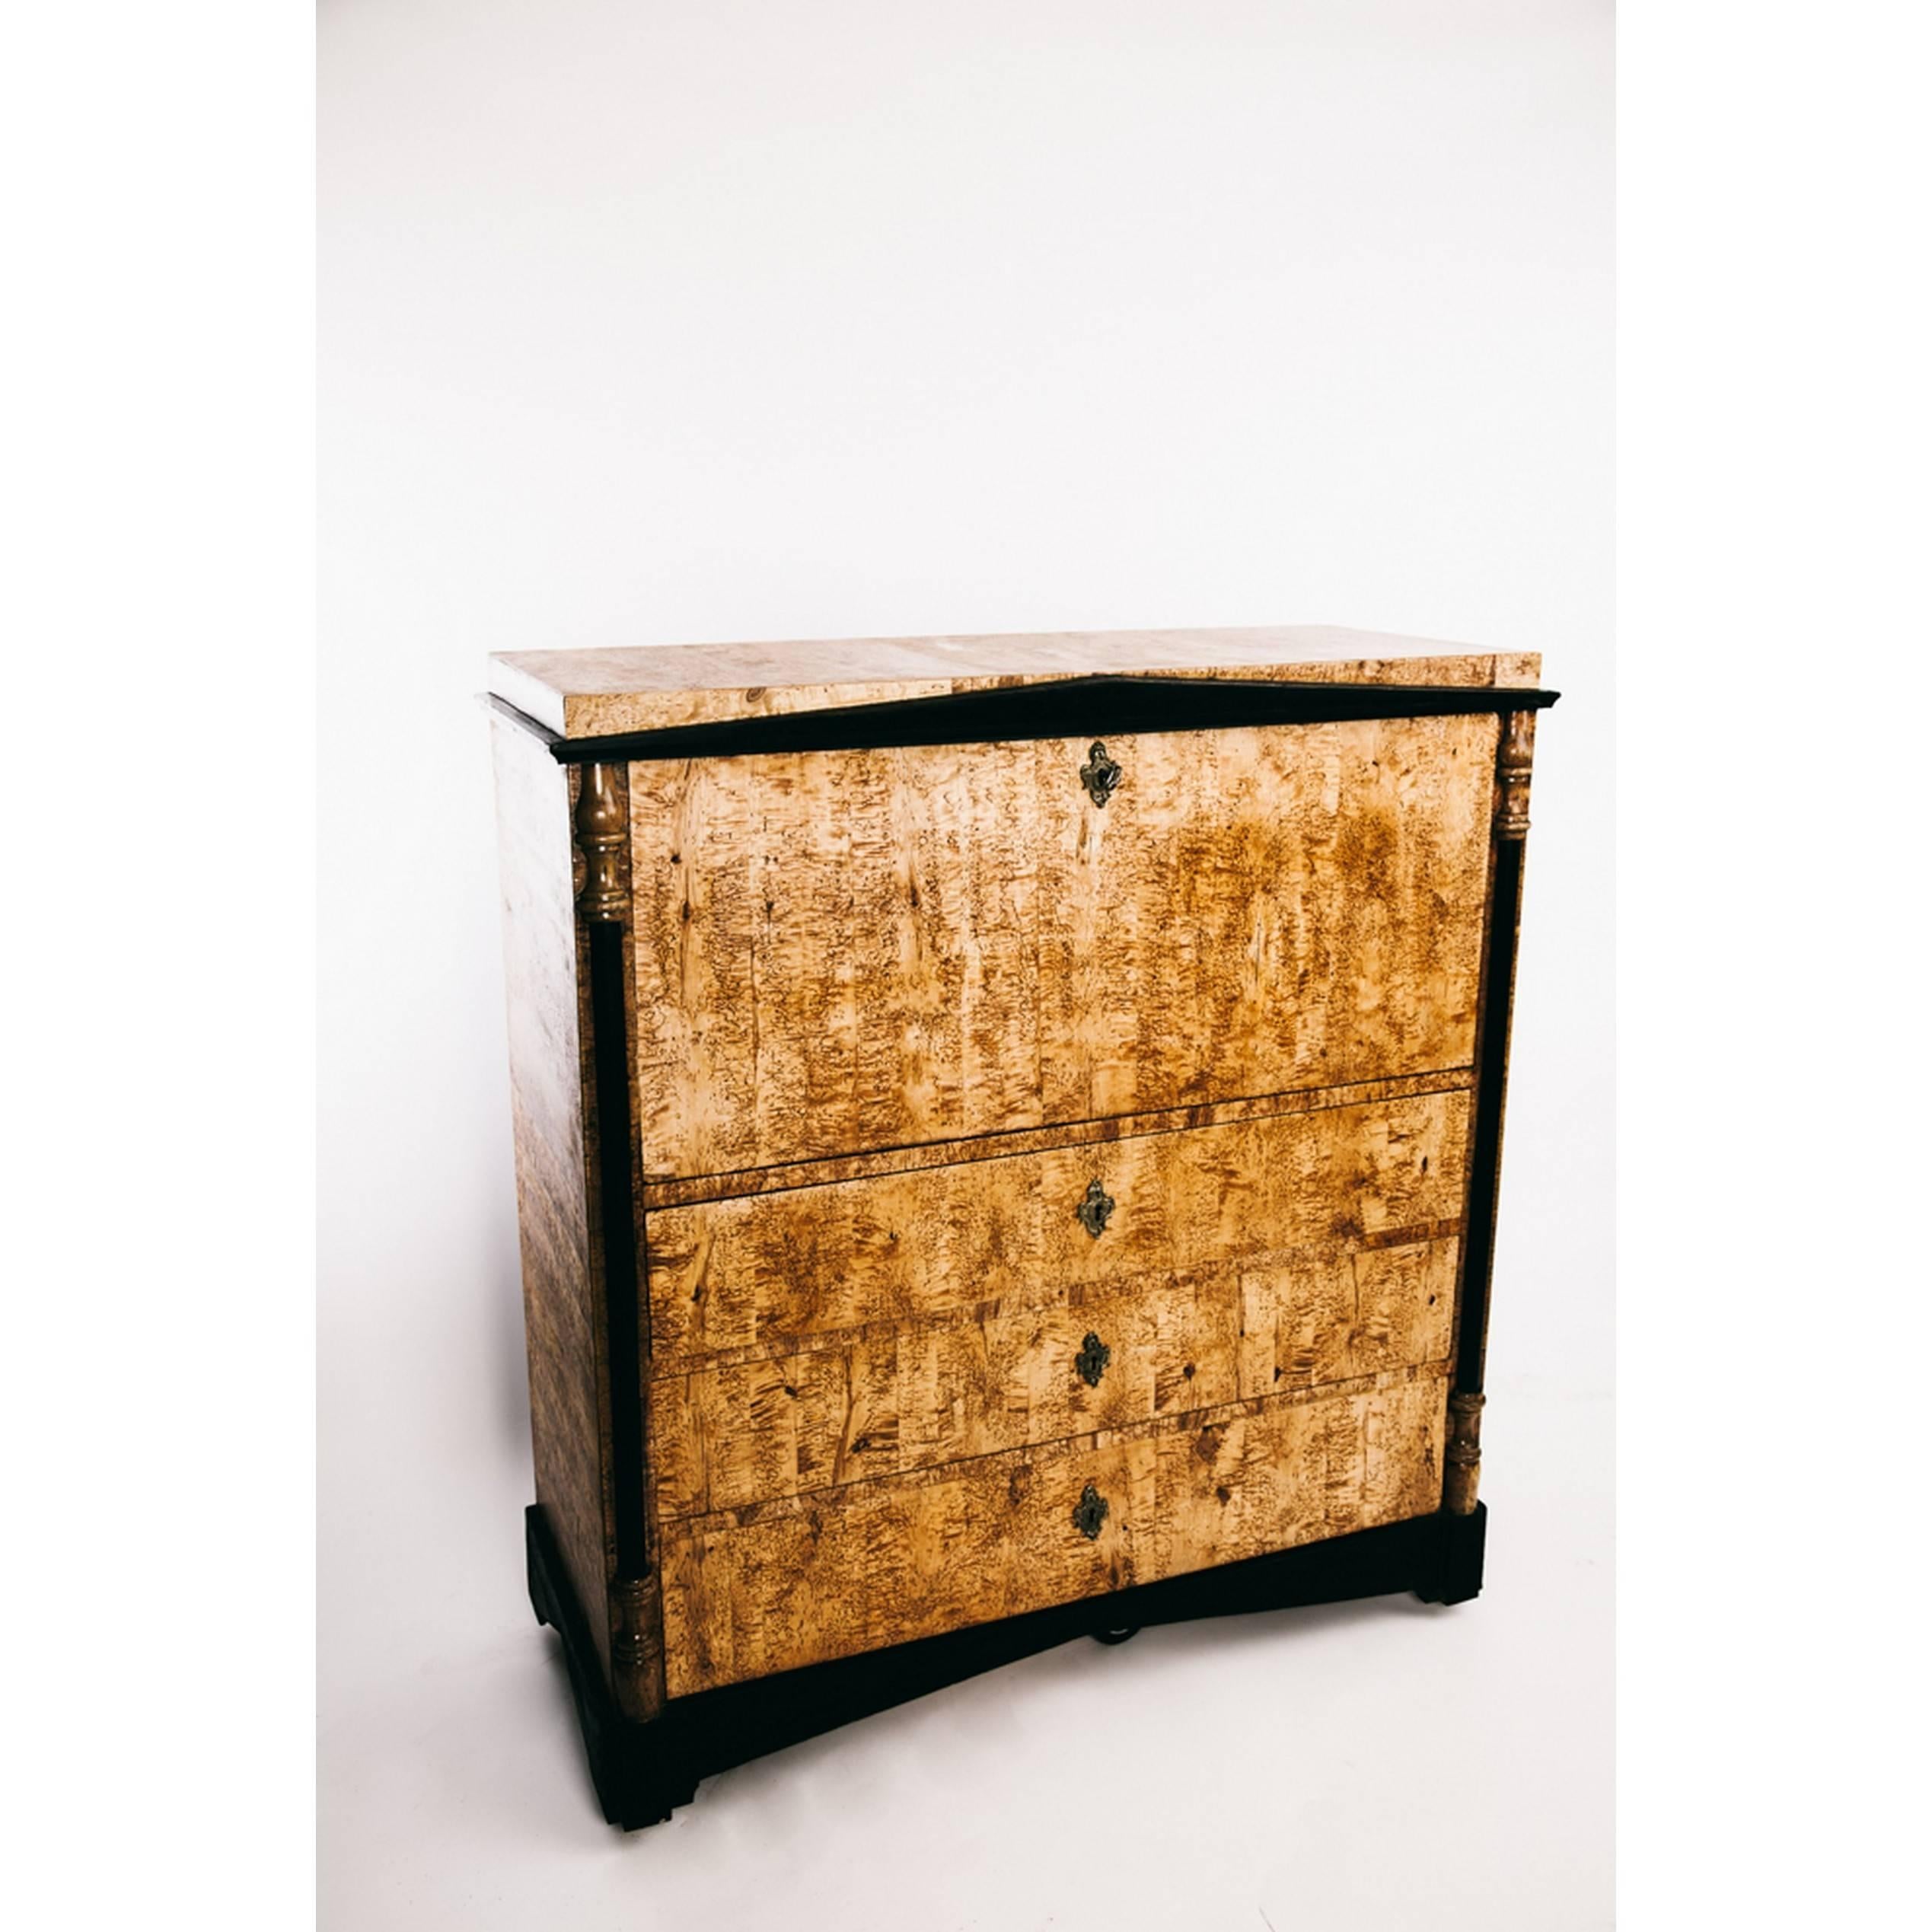 This chiffonje is made of masi birch veneer and represent the Empiric style very popular 1800-1820. Gustav III was Sweden’s King 1771–1792. A highly rare collector piece. Original looks and key. 

The chiffonier will be repolished prior to shipping